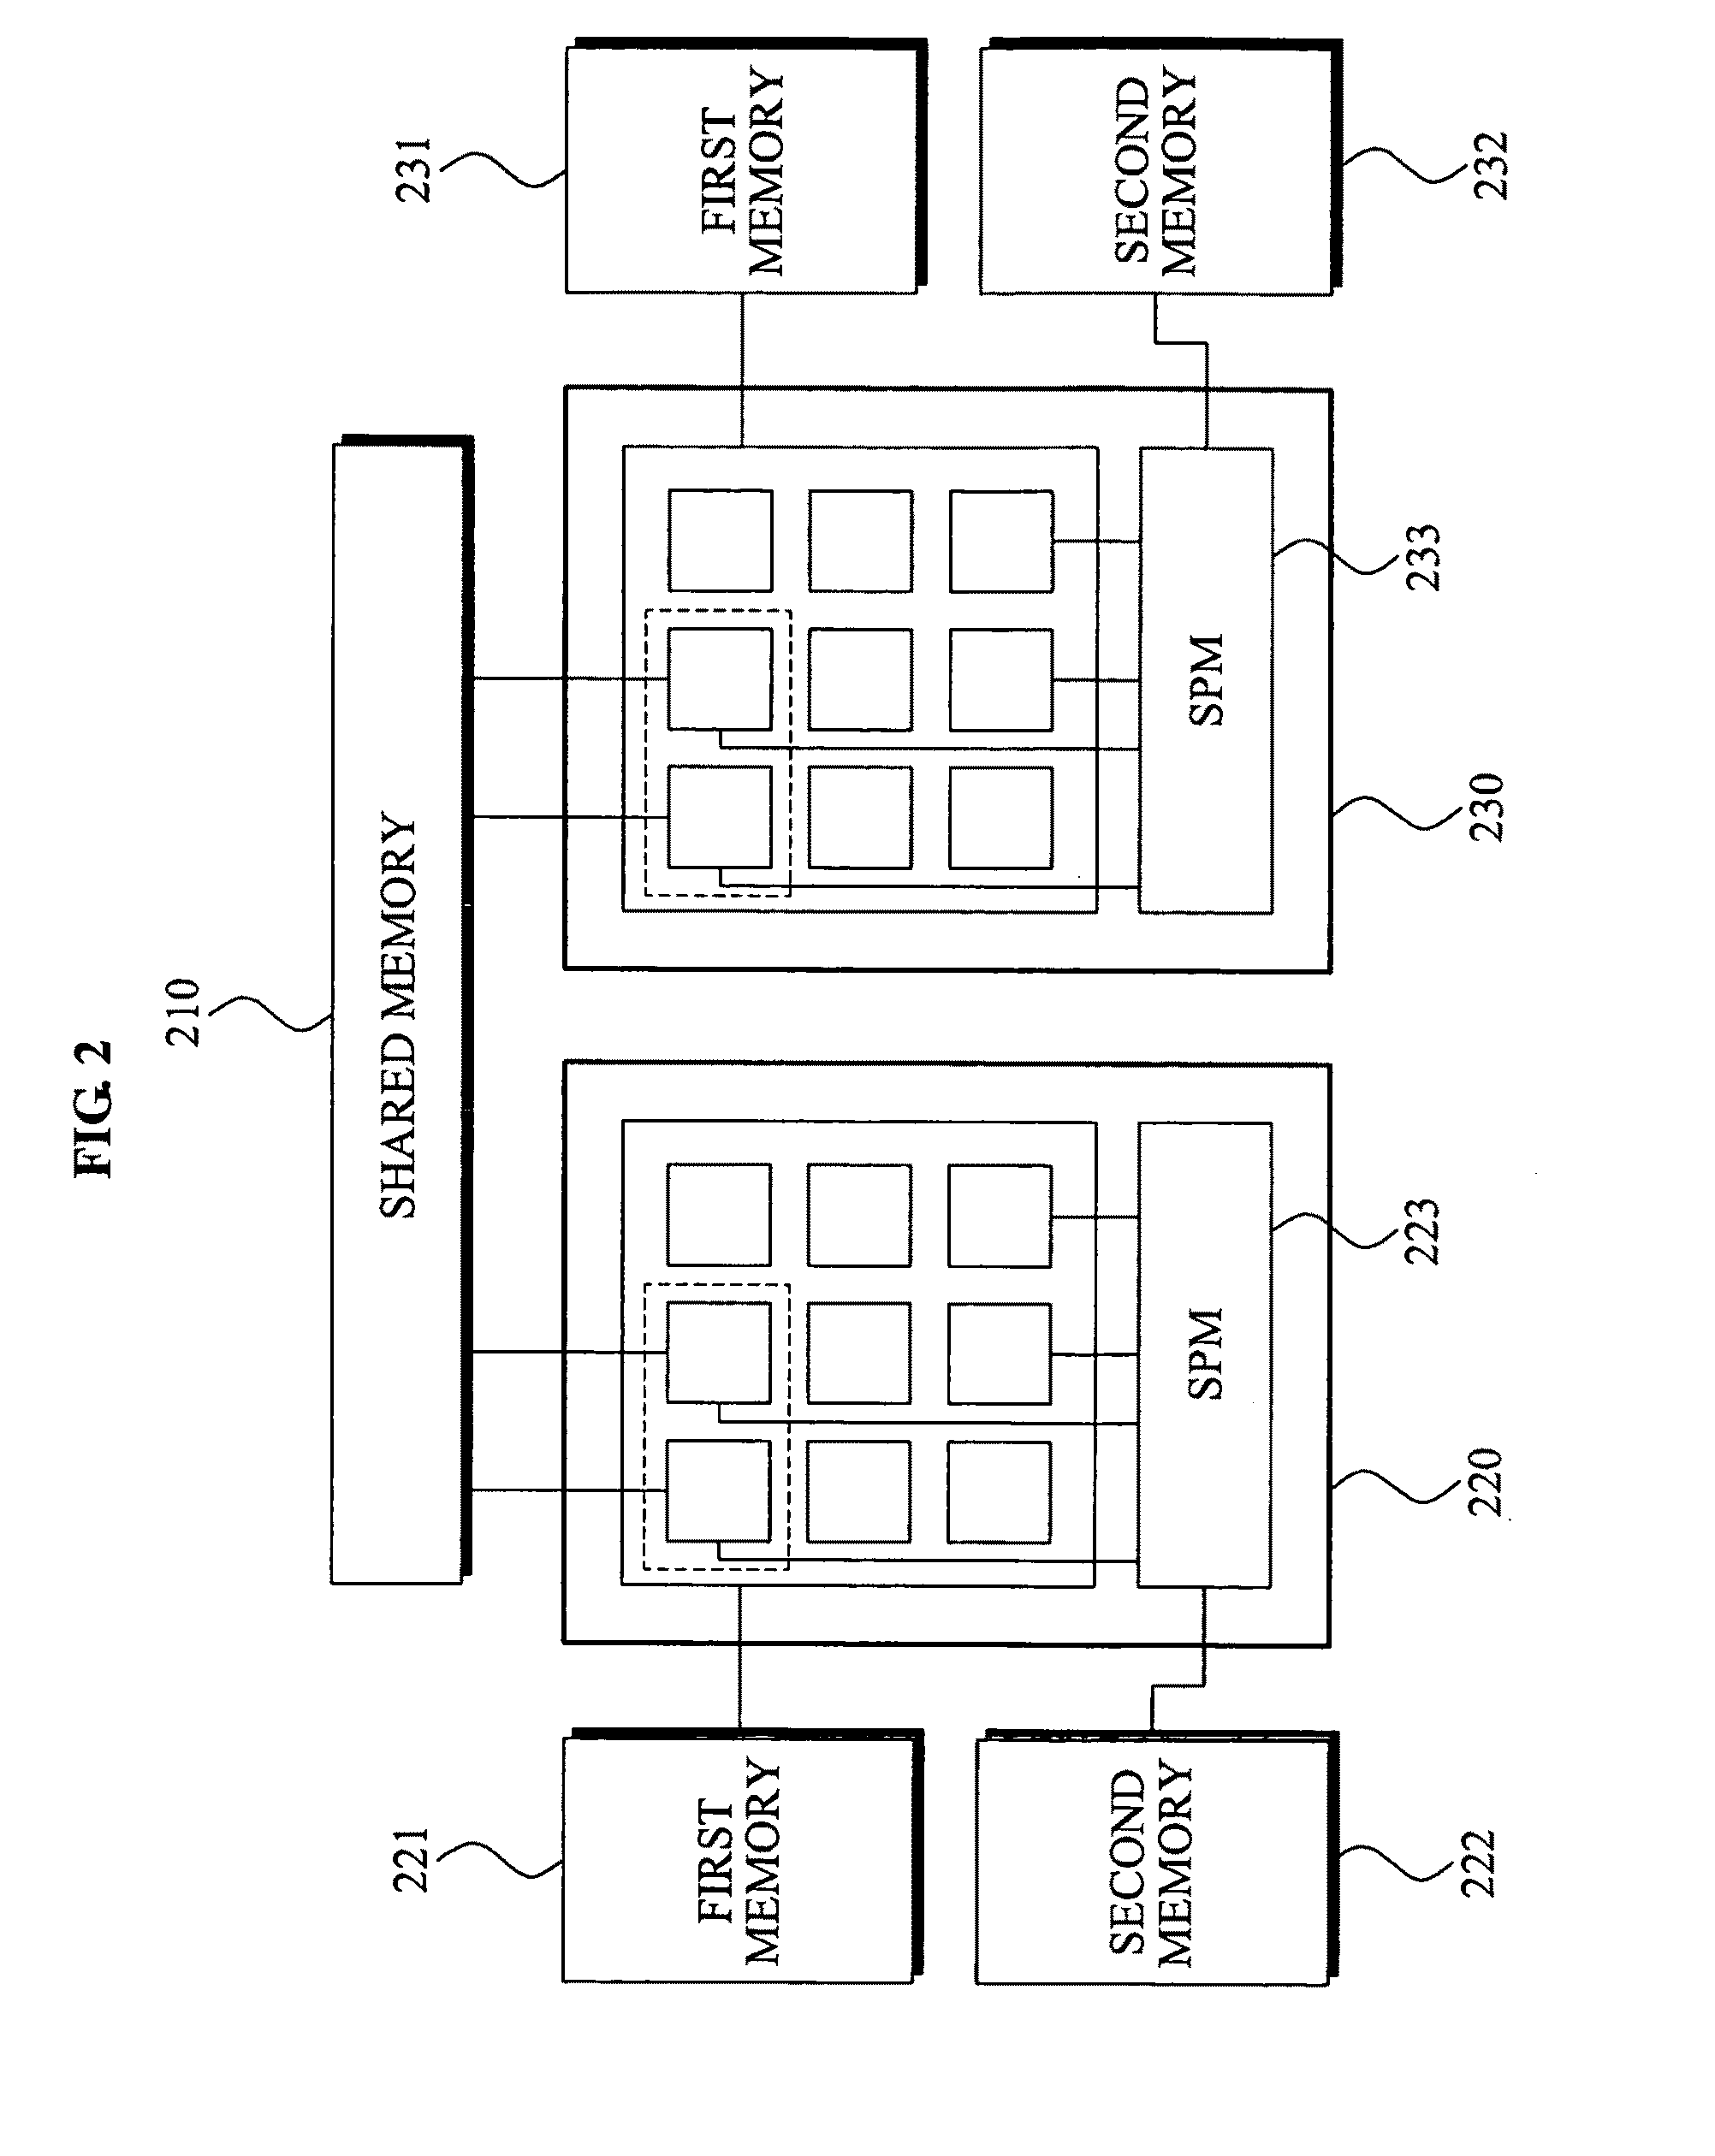 System and method of rendering 3D graphics